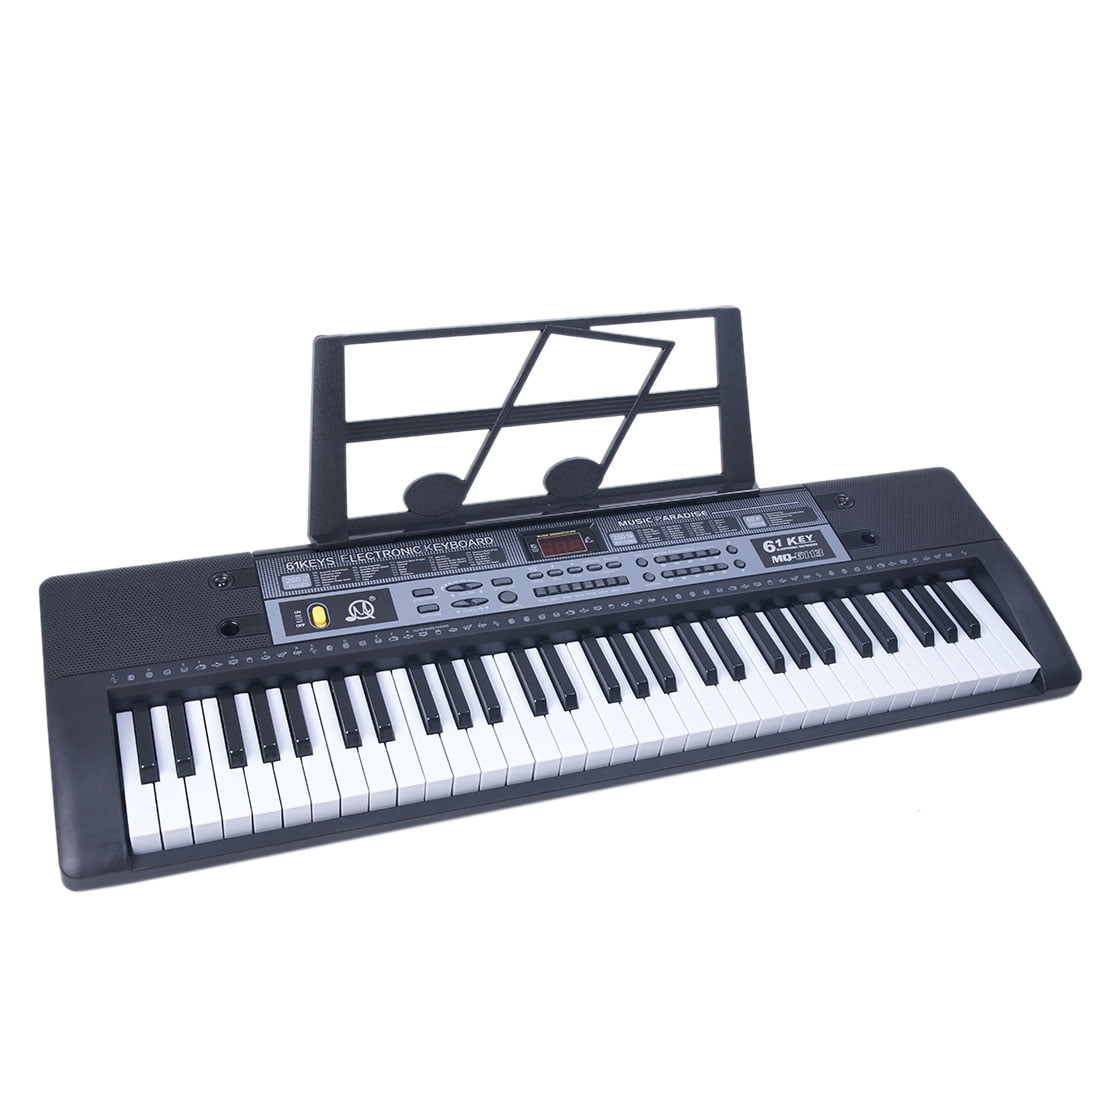 Popular Mini Plastic Electronic Keyboard Piano Kid Toy Musical Instrument:A7CA 